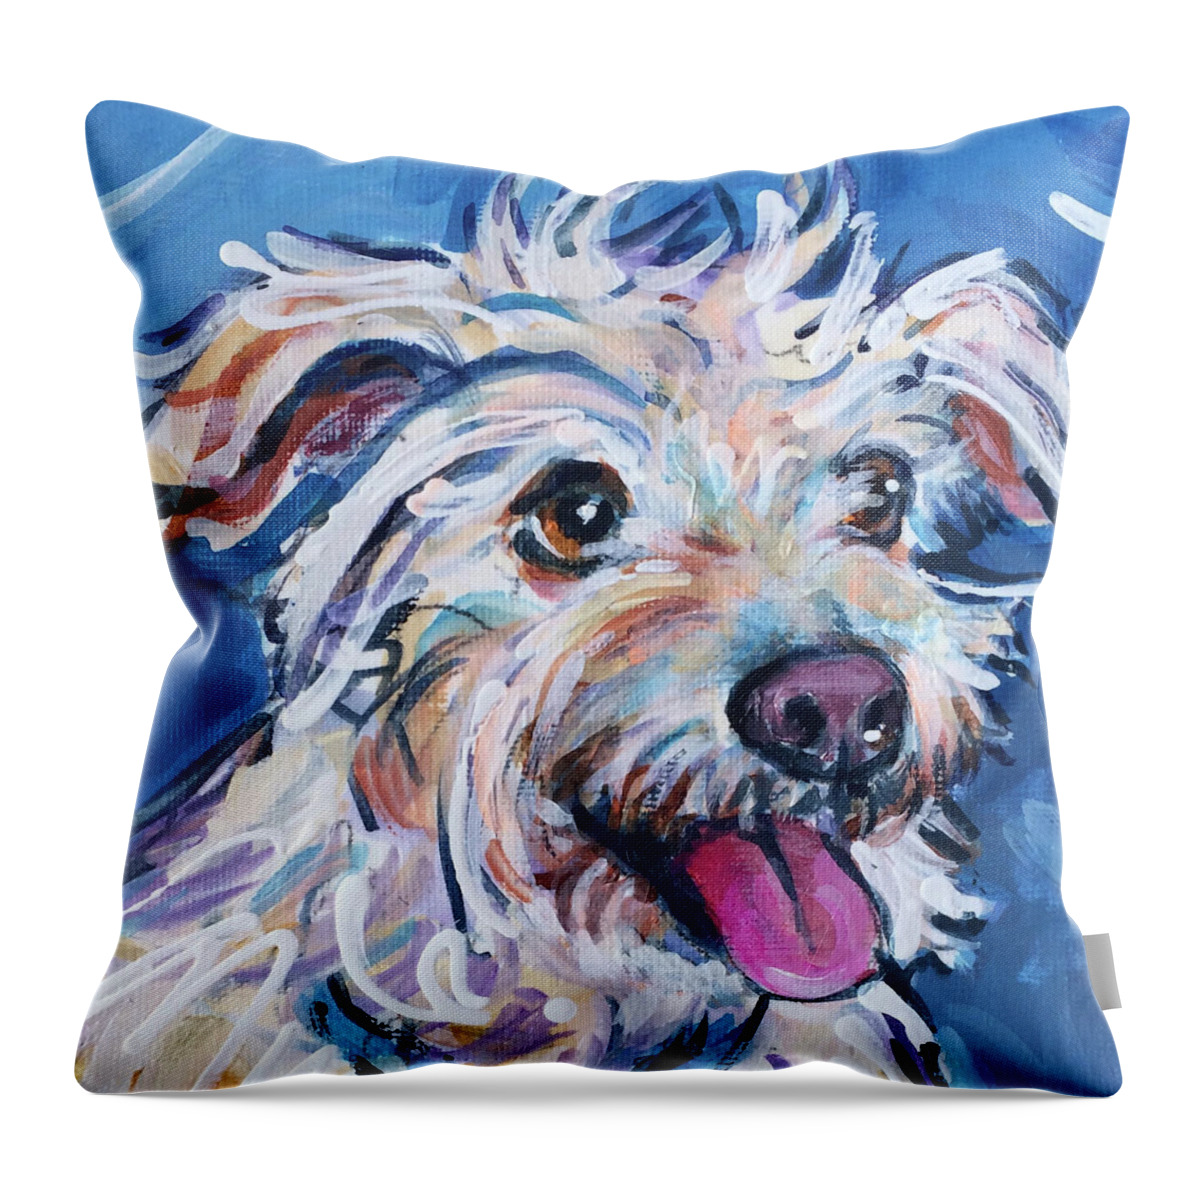  Throw Pillow featuring the painting Osita by Judy Rogan